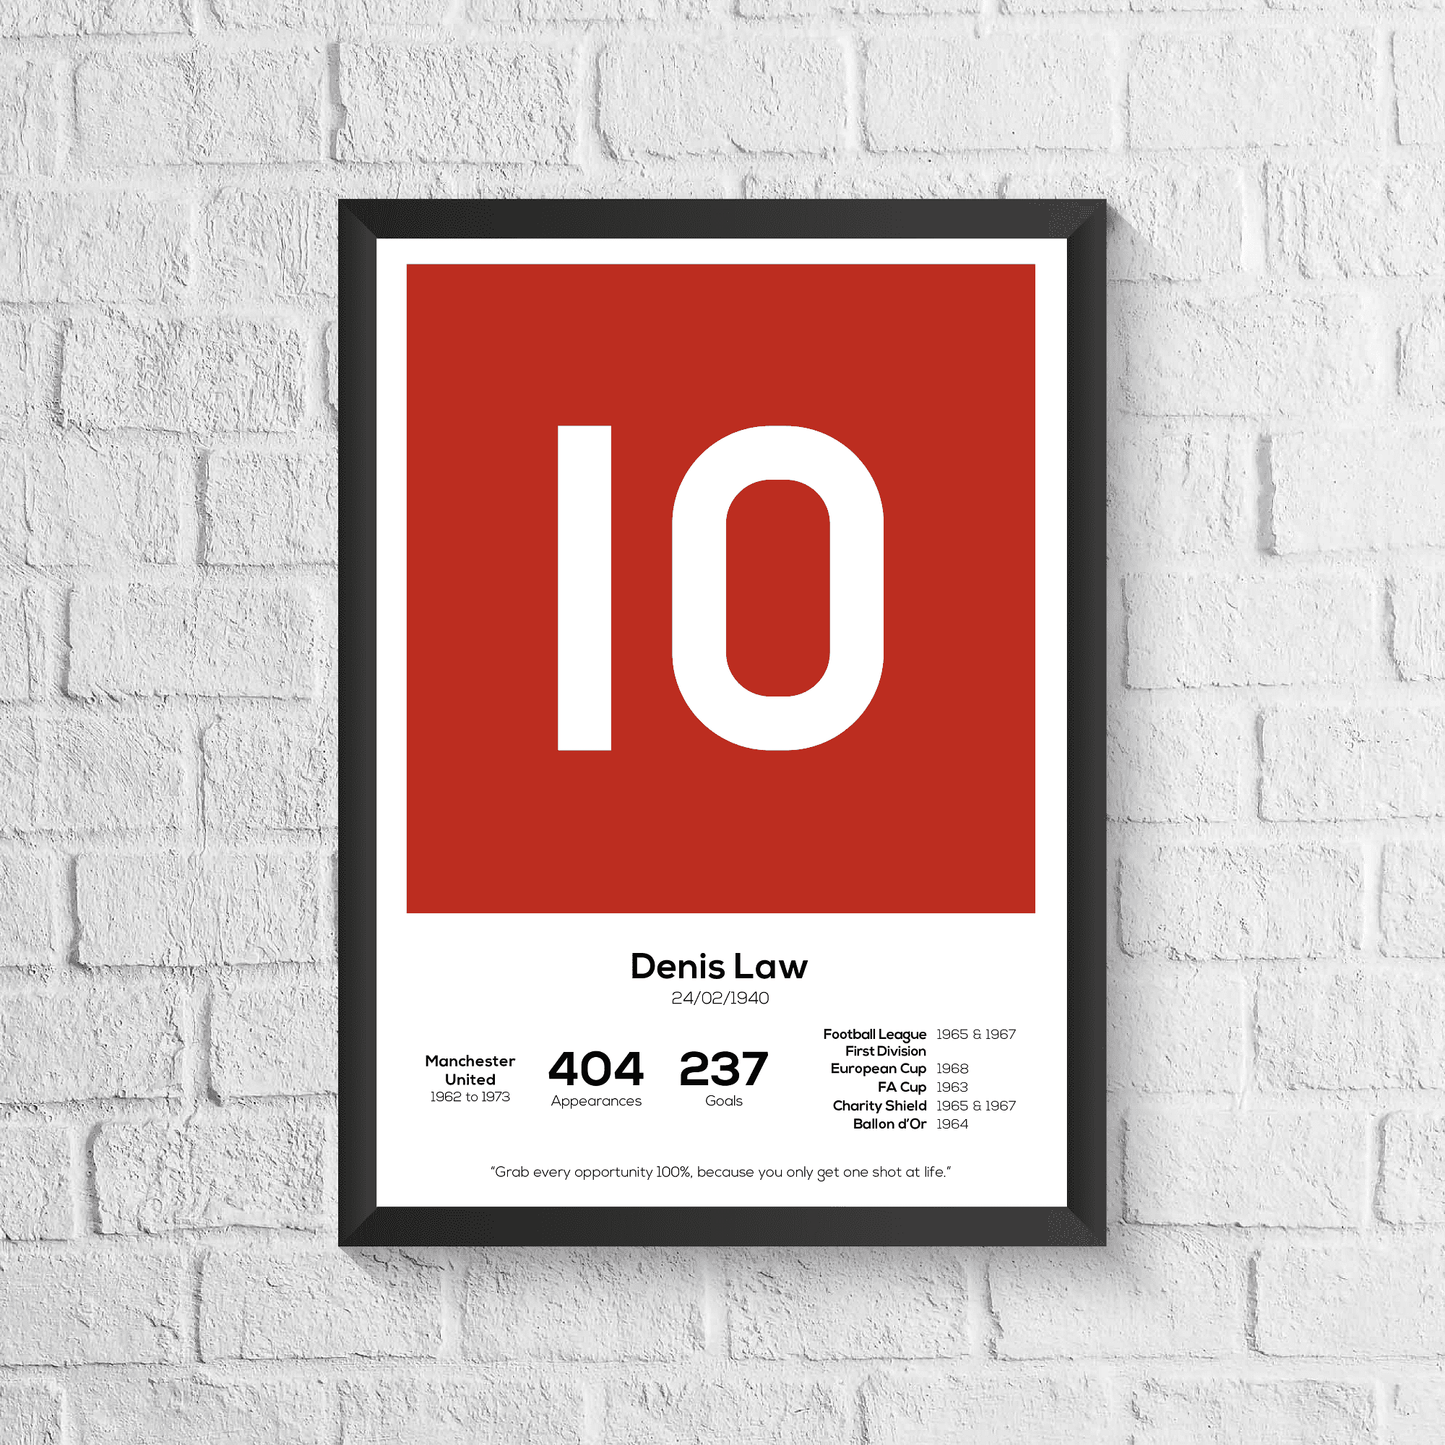 Manchester United Holy Trinity Legend Stats Print Set of 3